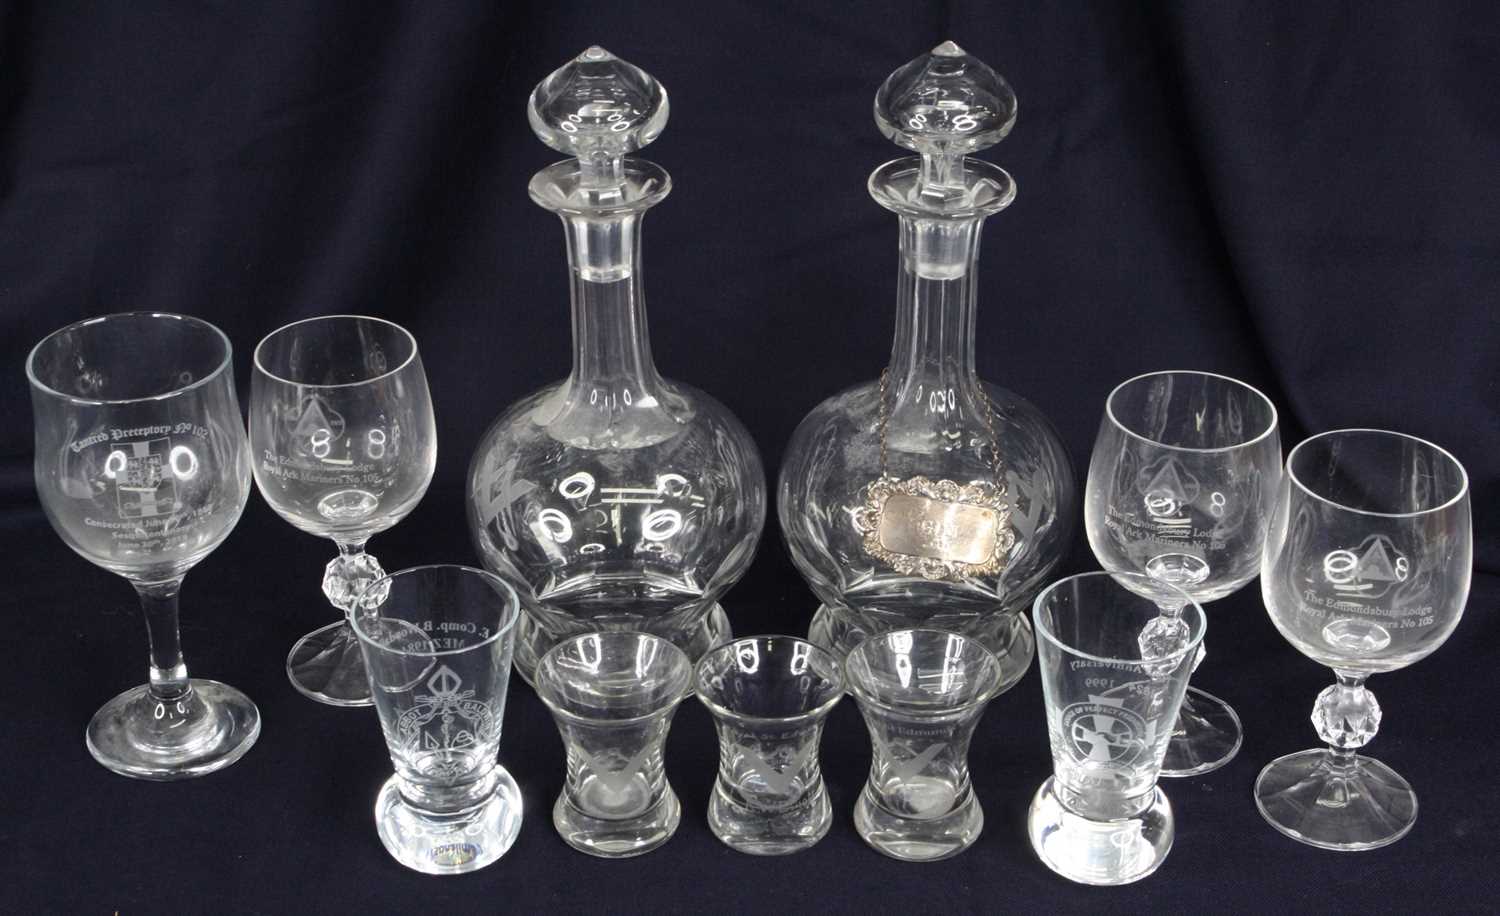 A pair of Masonic cut glass decanters, each having a mushroom stopper to a fluted neck and bulbous